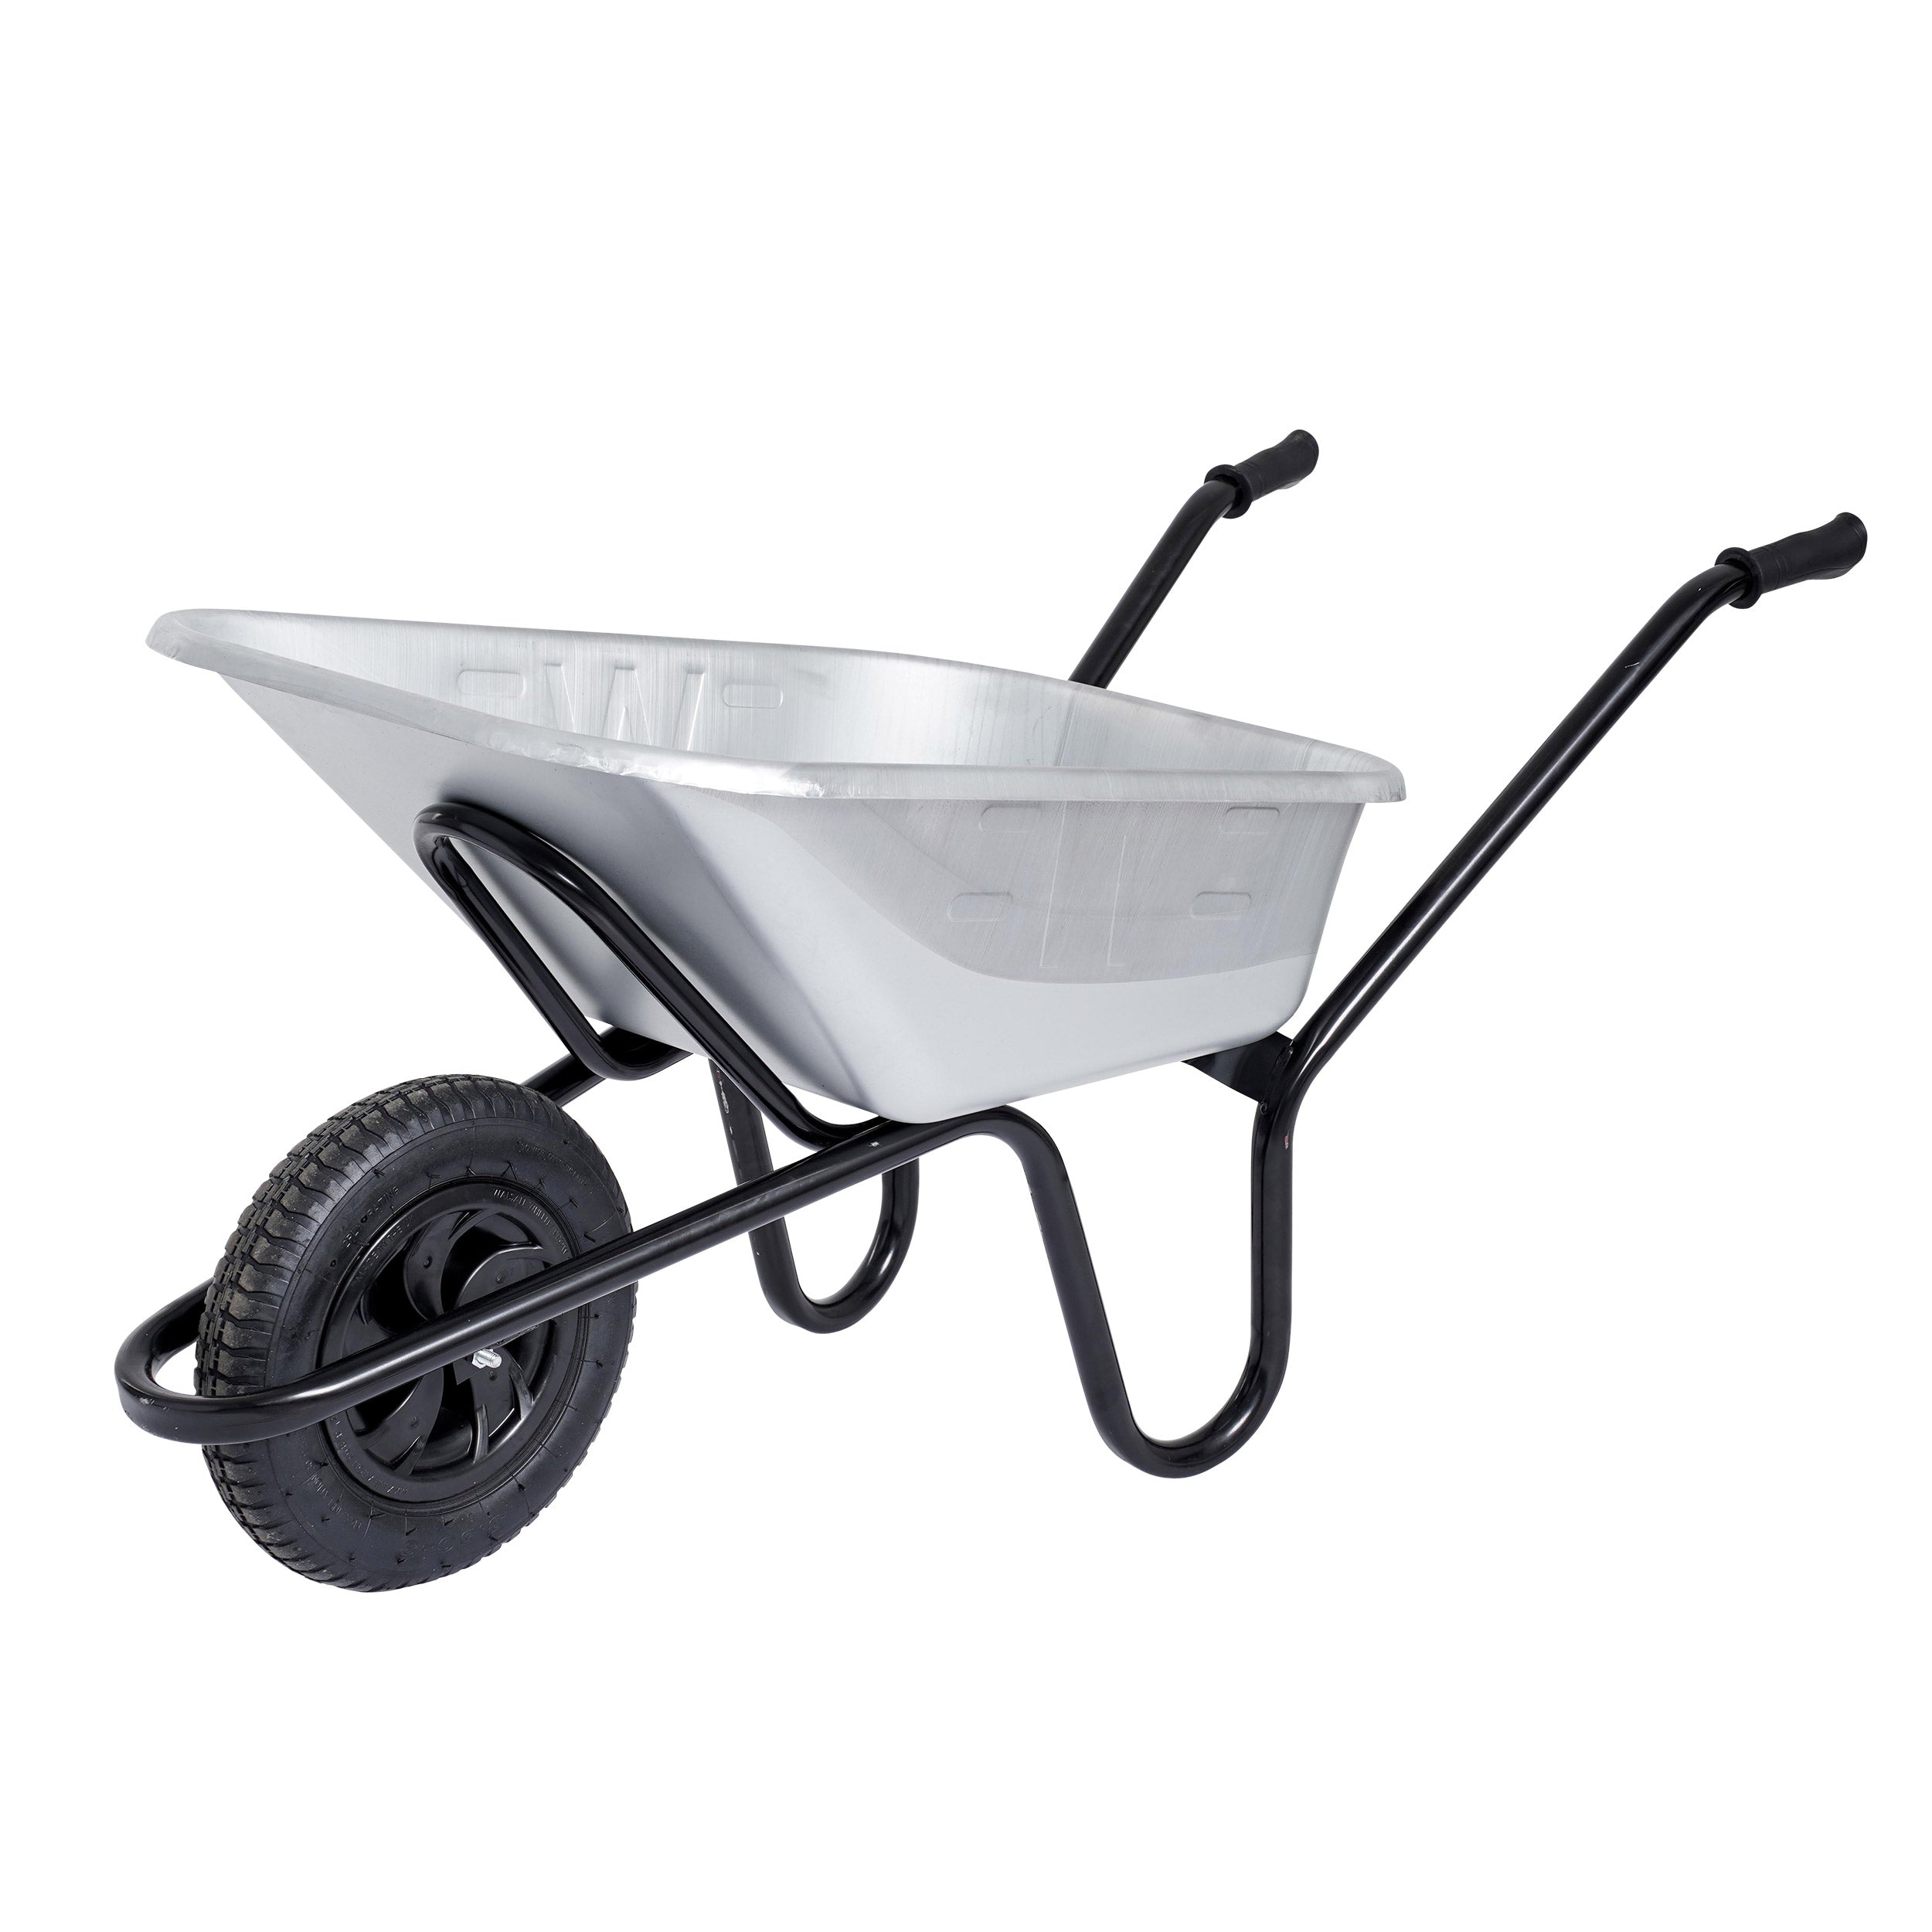 Side image of Invincible Galvanised Wheelbarrow, silver body with black tyre and frame